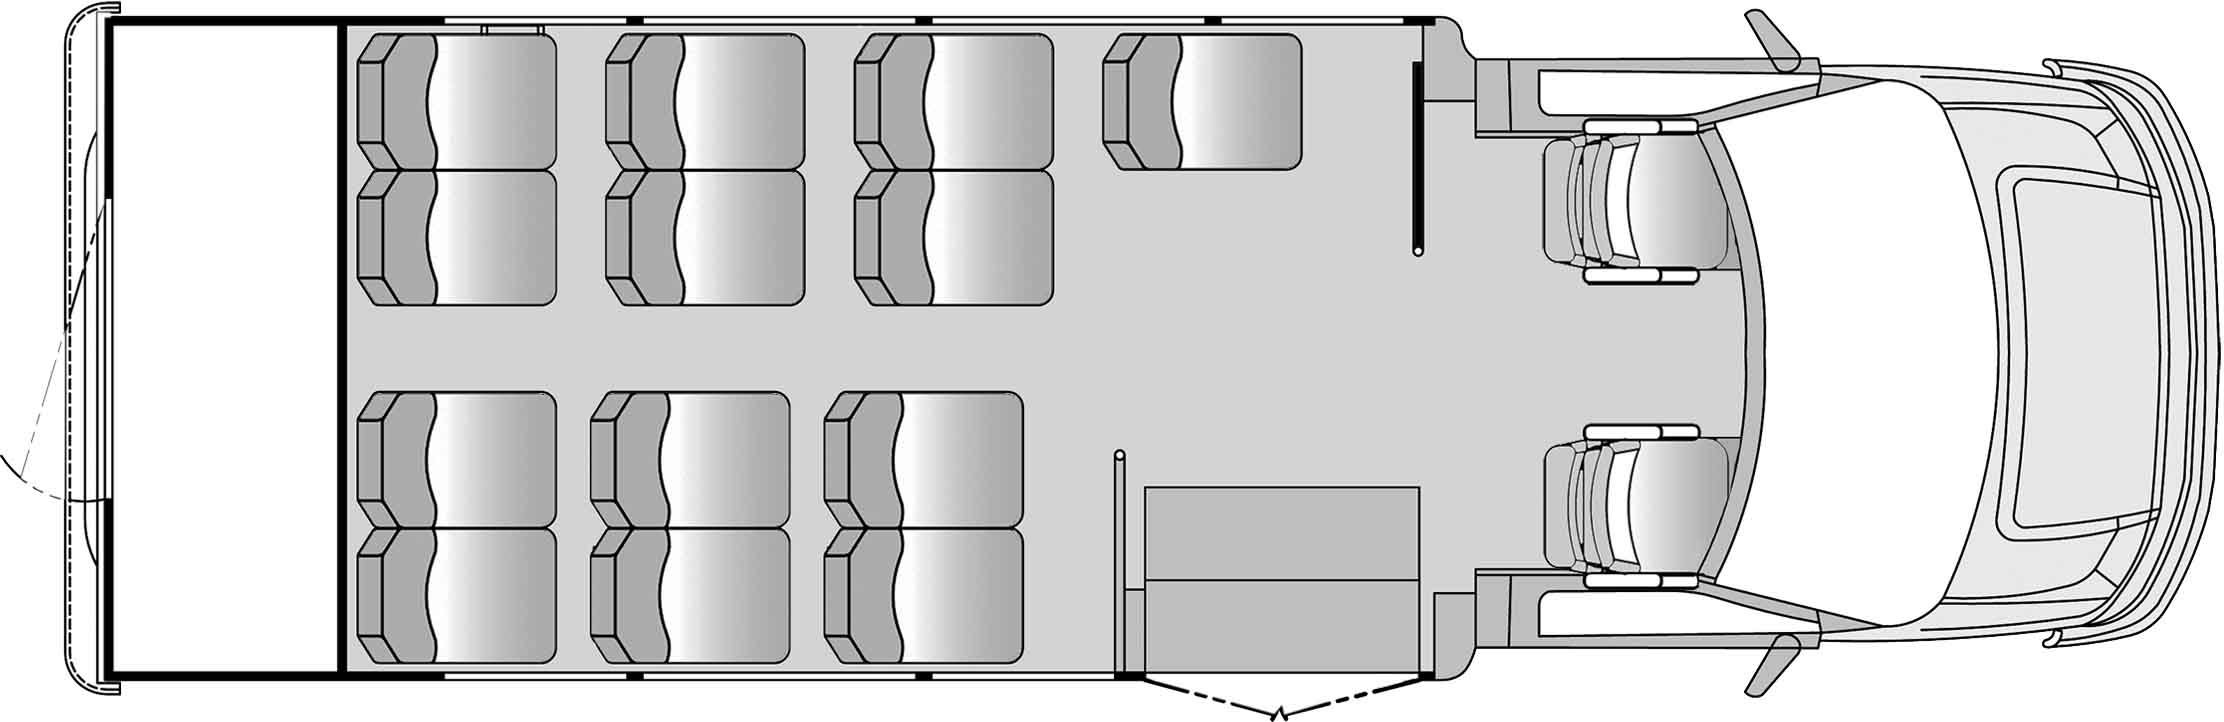 13 Passenger and Rear Luggage Plus Driver and Copilot Floorplan Image